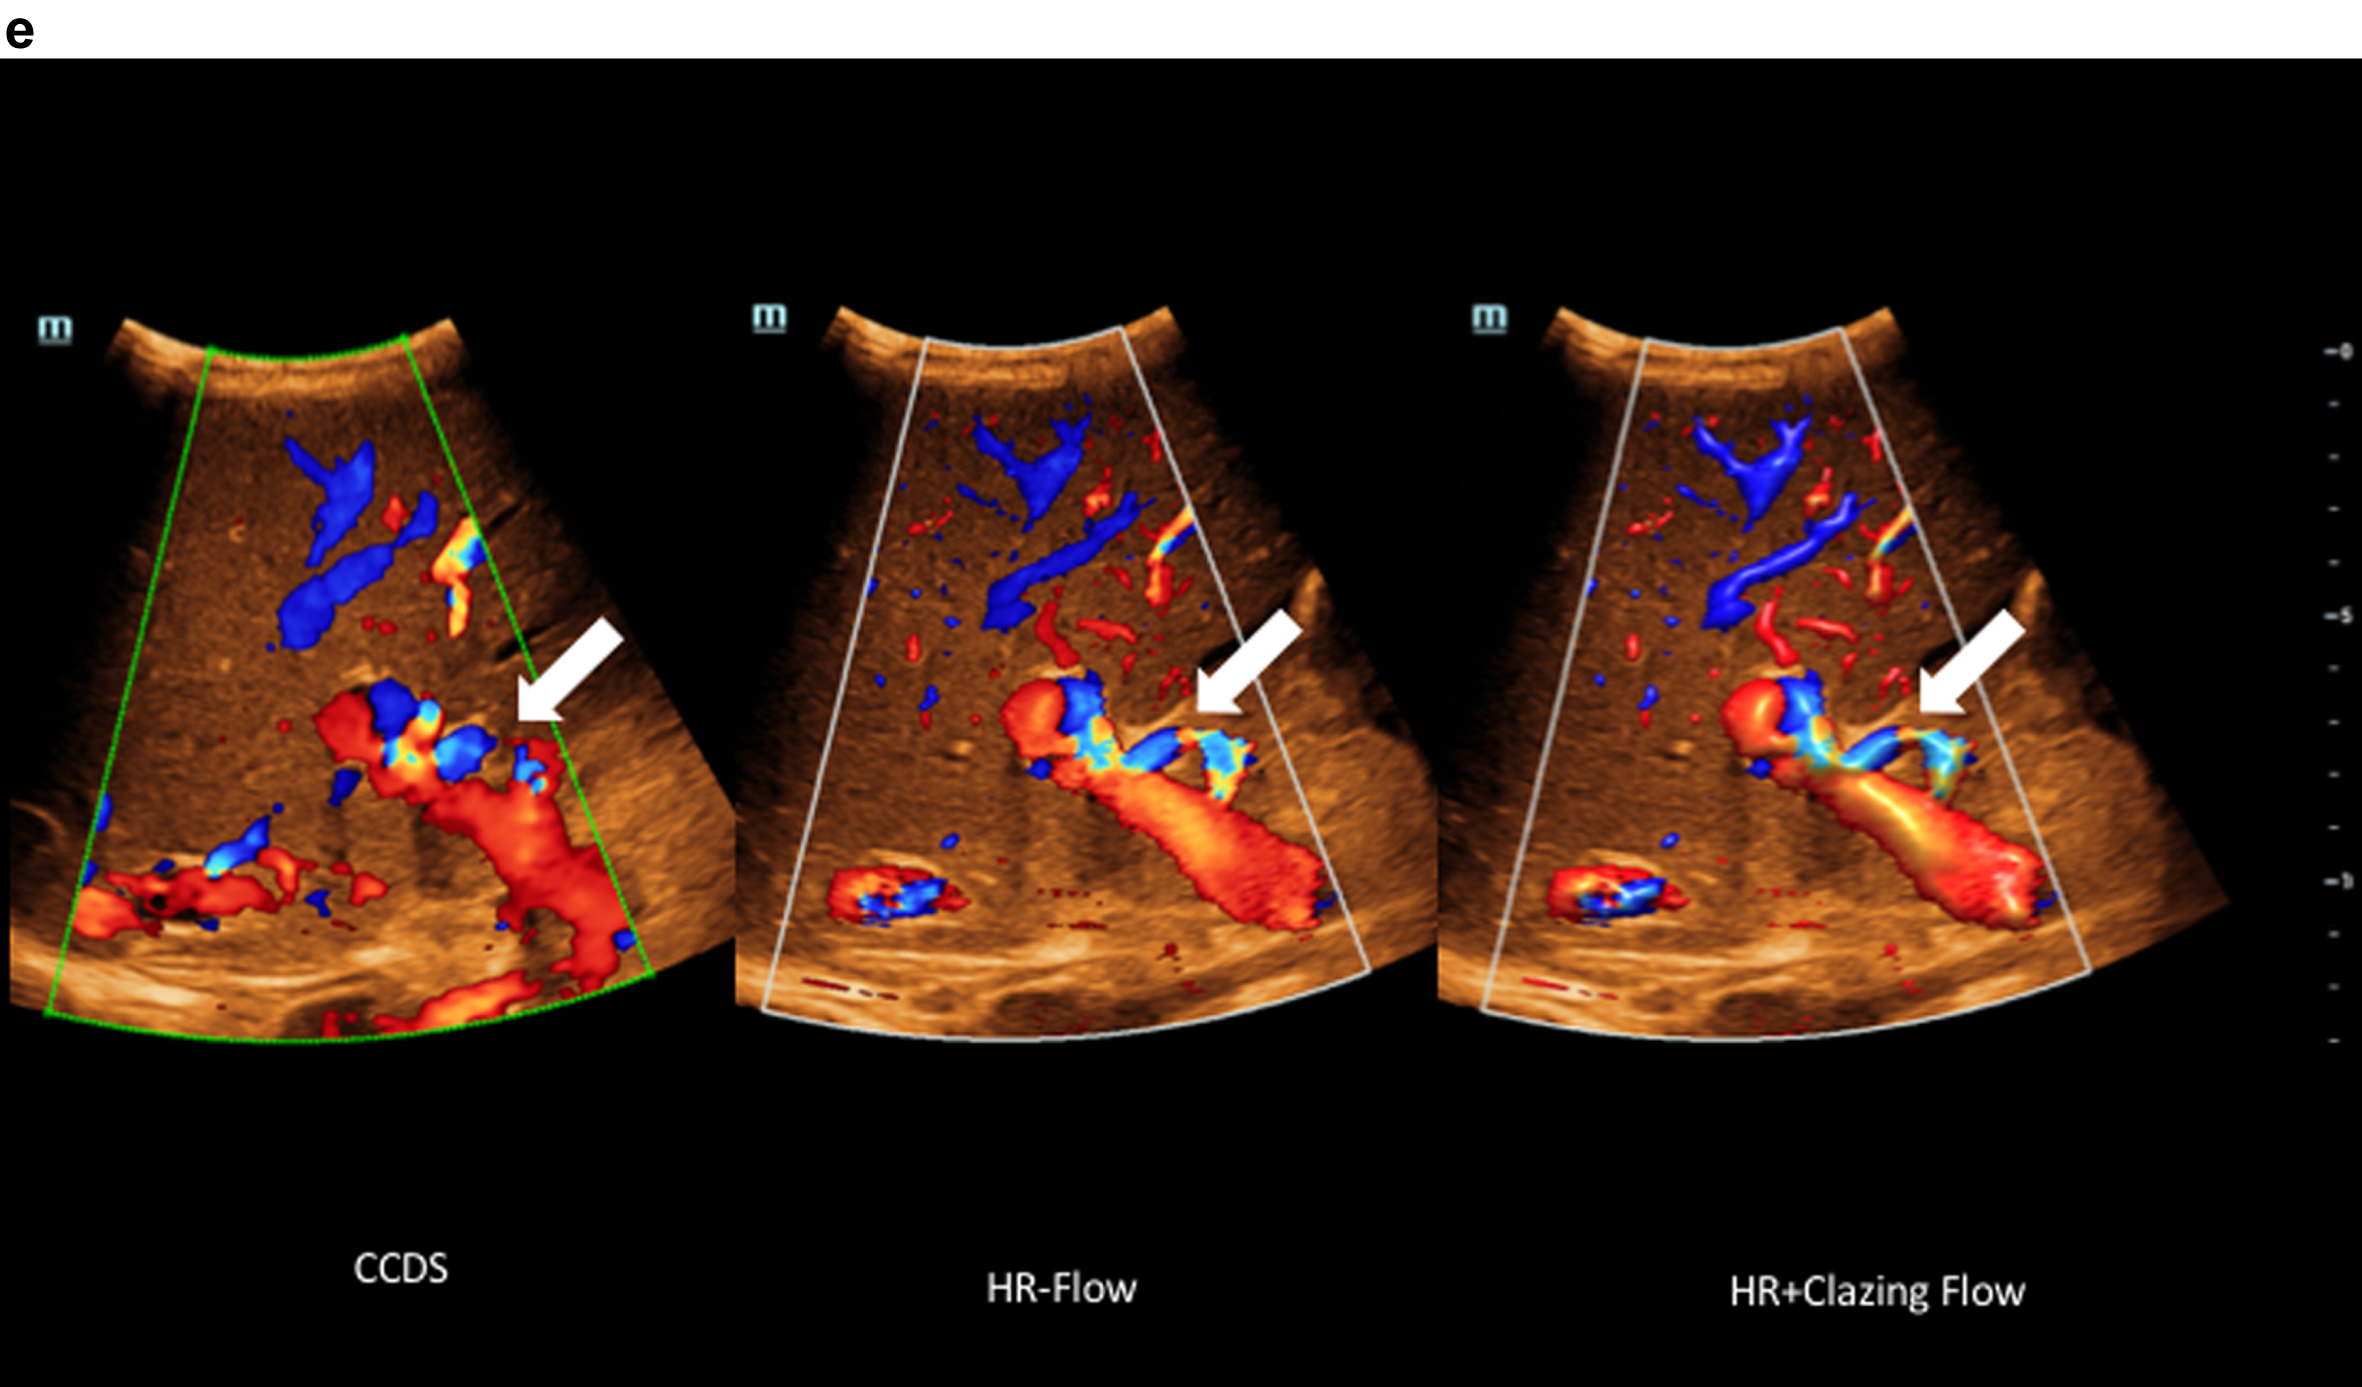 Comparison of flow imaging with CCDS and HR and Glazing Flow with significantly lower artefacts and higher image quality for the detection of the elongated arteria hepatica (arrow), the vena portae and the hepatic veins with HR and Glazing Flow.